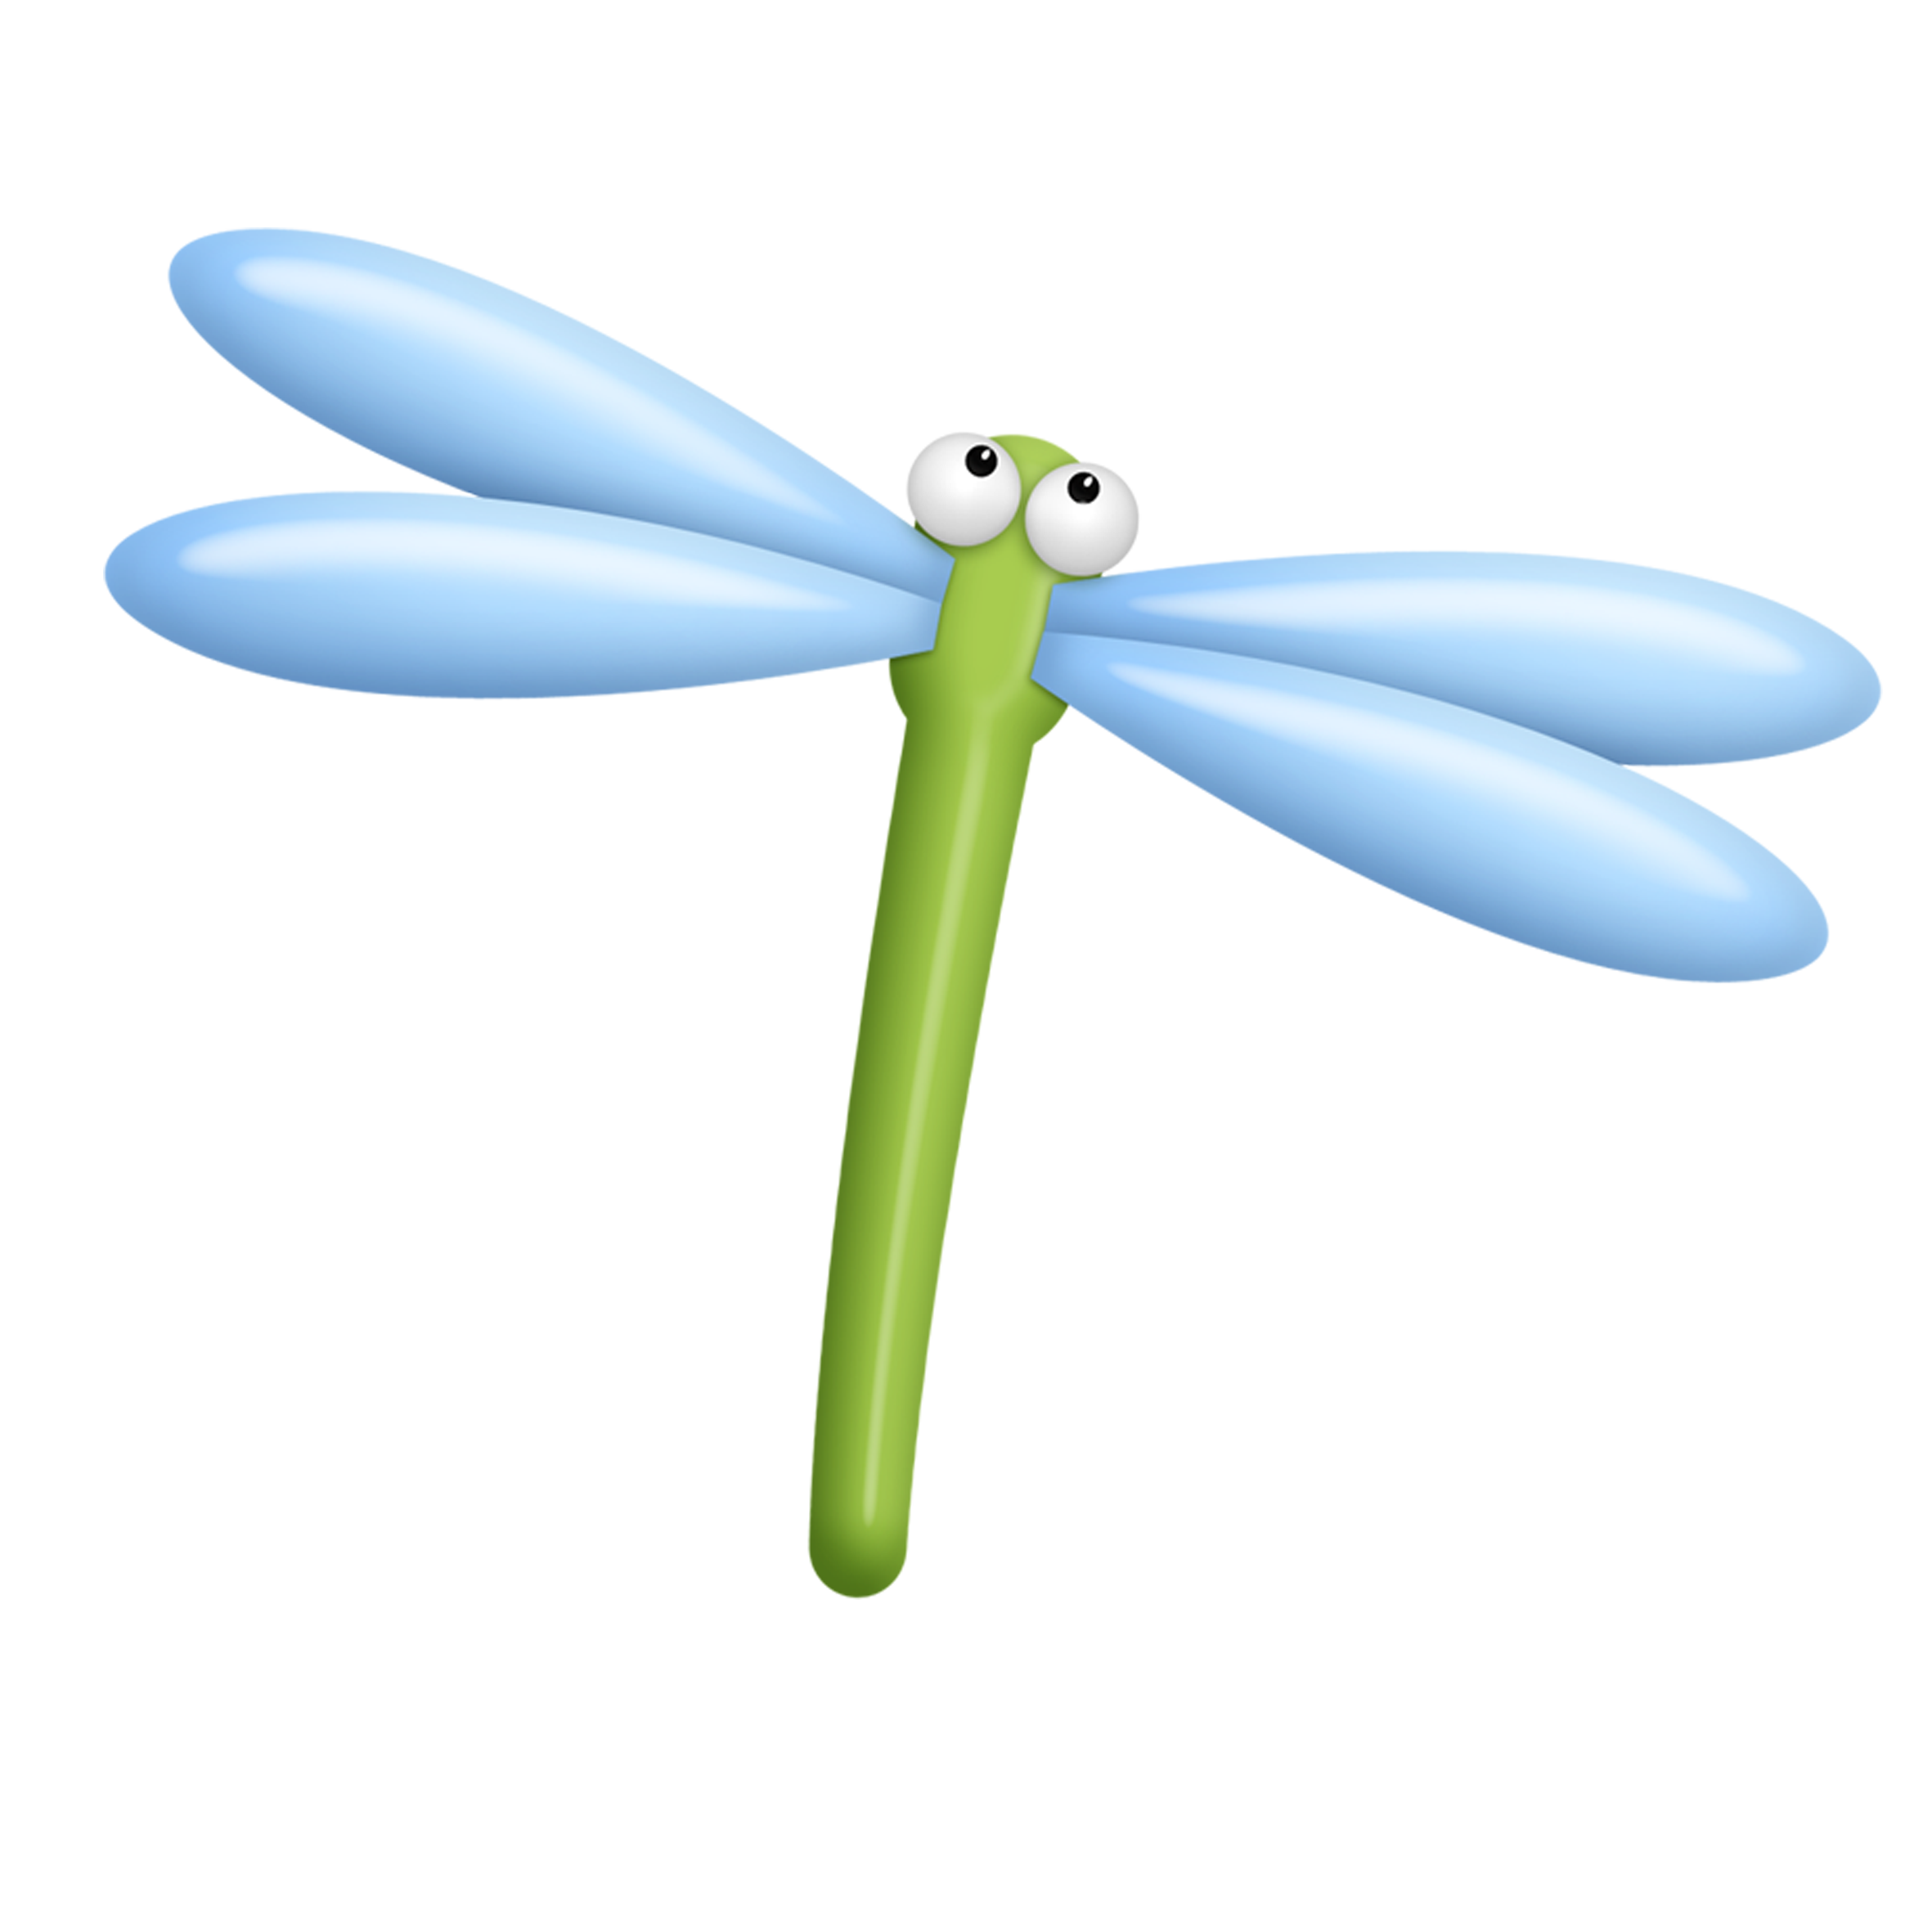 dragonfly clipart watercolor